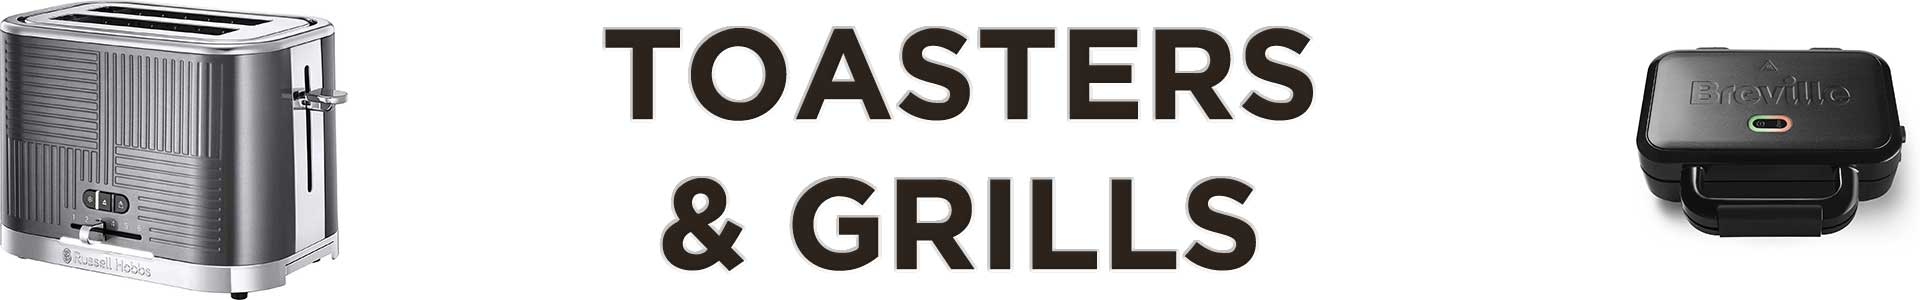 Toasters and Grills